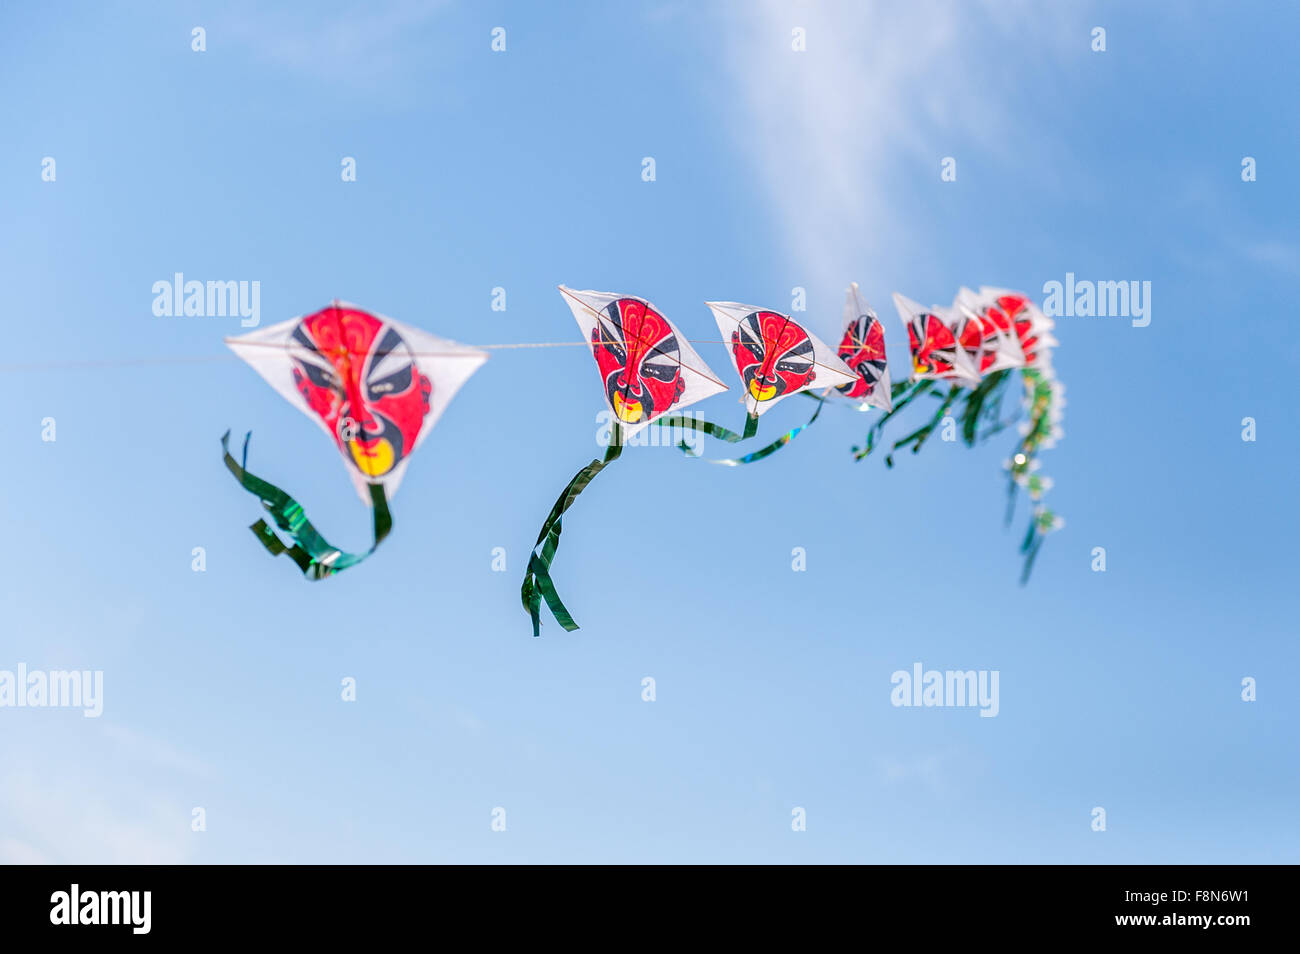 Multiple kites connected in sky with red faces Stock Photo